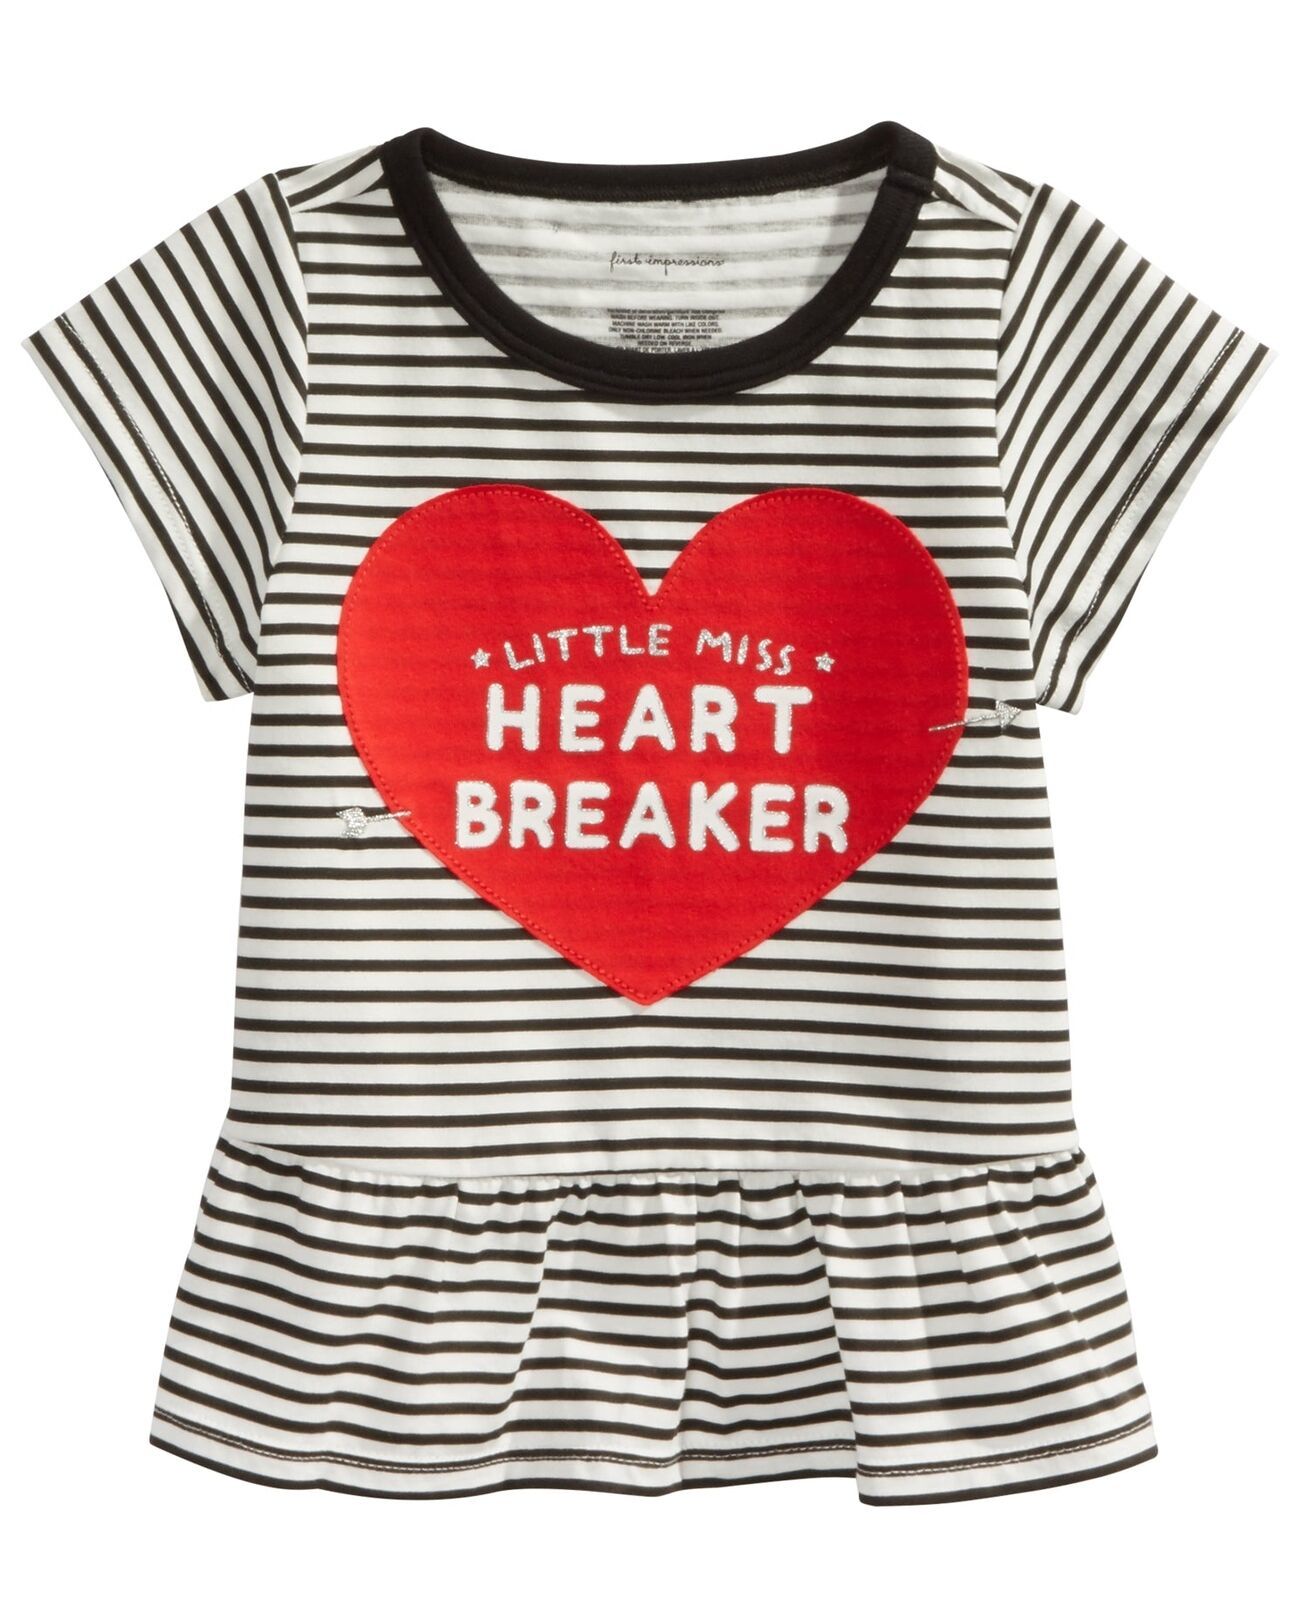 Primary image for First Impressions Infant Girls Striped Heartbreaker Print T-Shirt,White,12Months